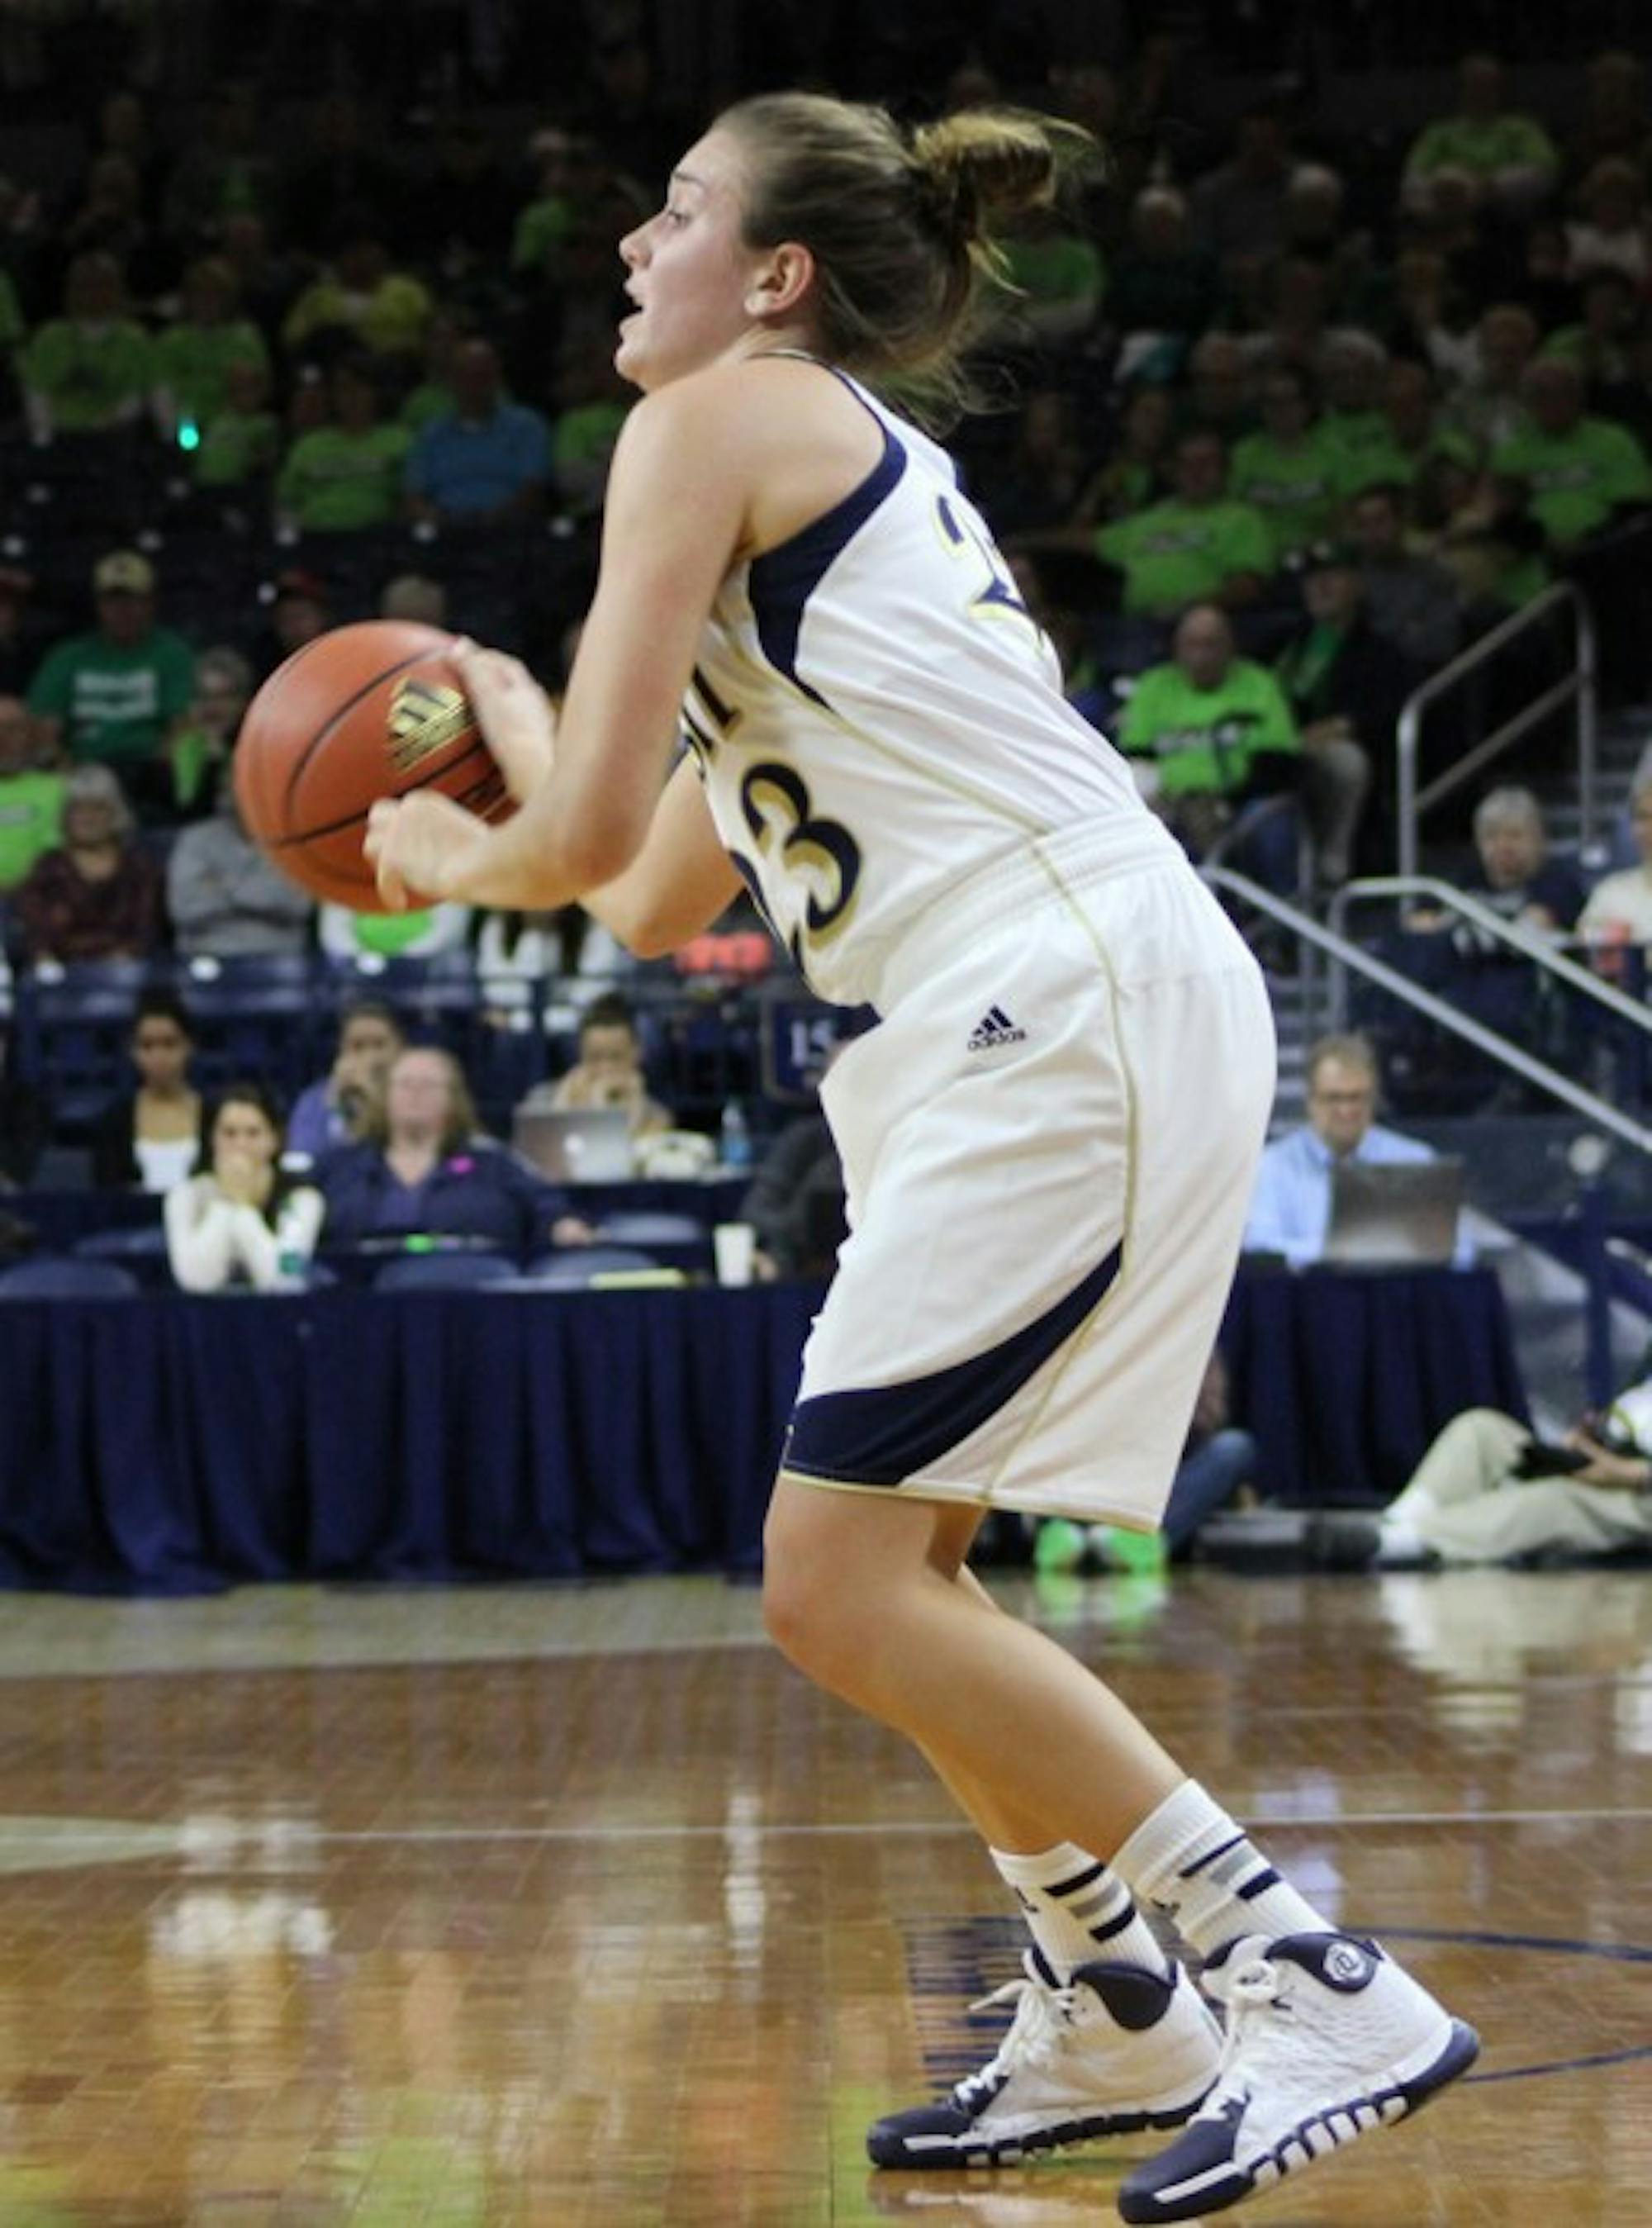 Irish sophomore guard Michaela Mabrey looks to shoot during Notre Dame’s 99-50 victory over UNCW on Nov. 9, 2013.